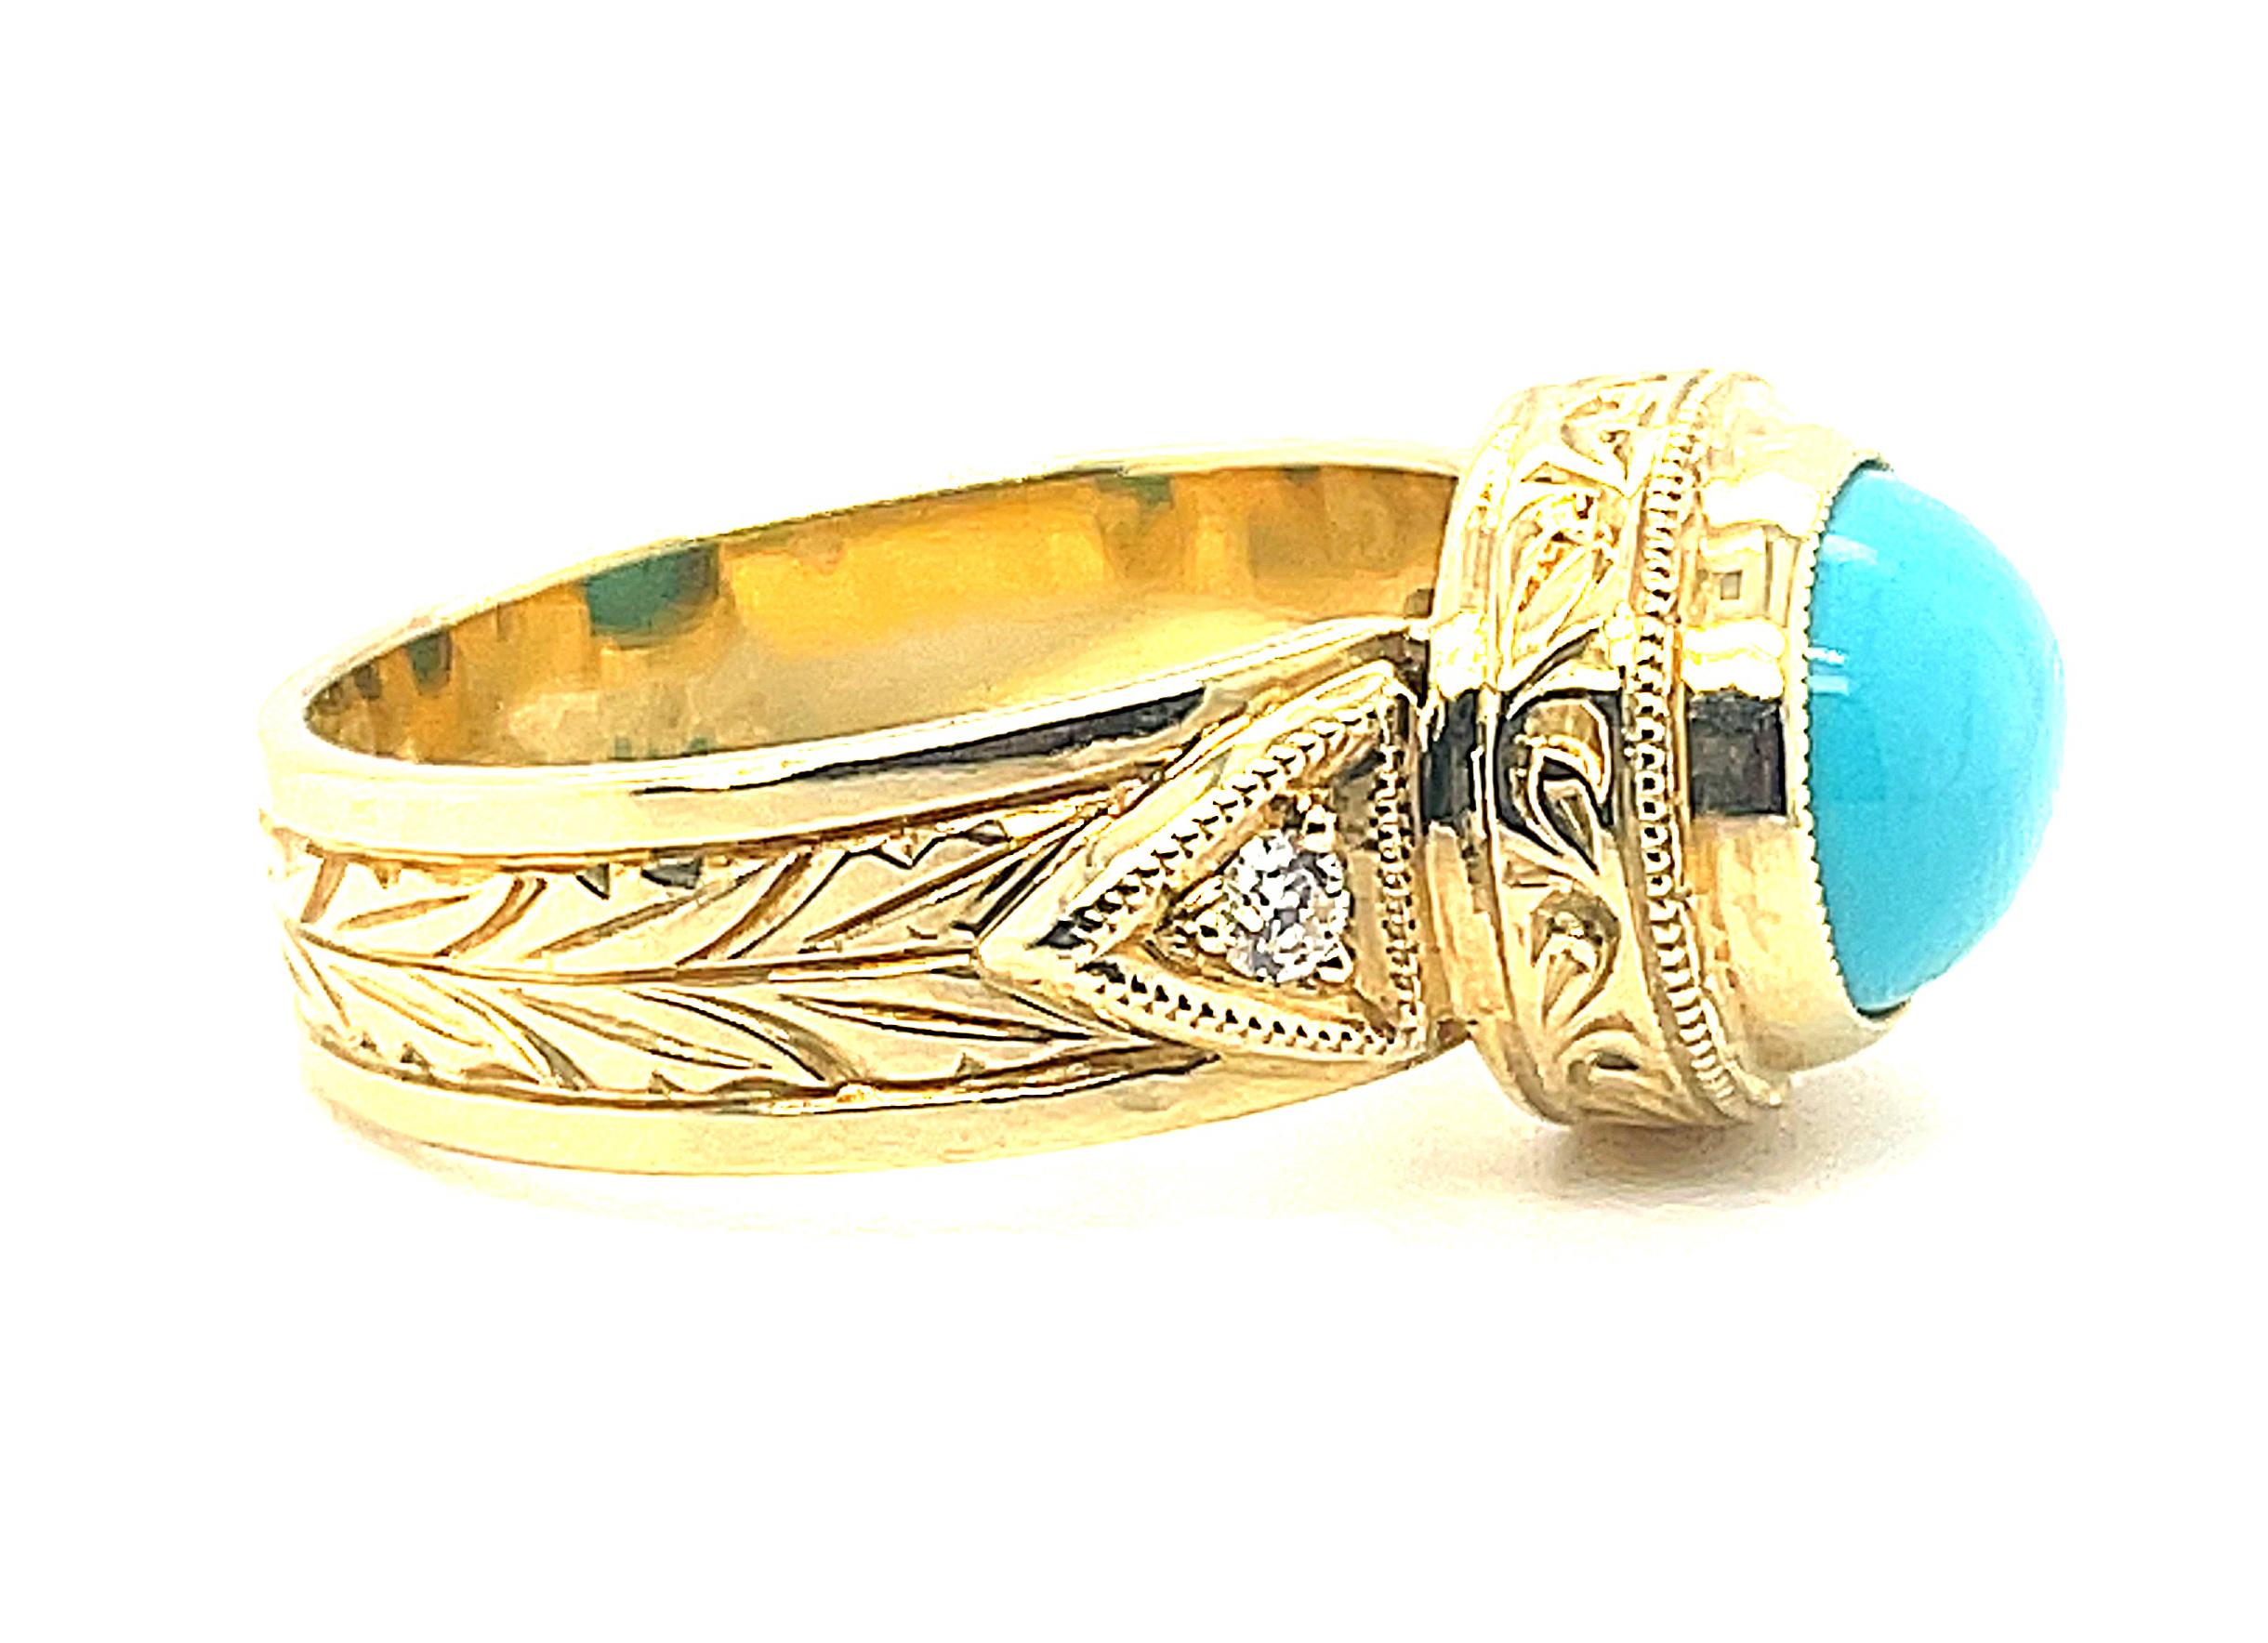 Cabochon 2.13 Carat Sleeping Beauty Turquiose and Diamond Band Ring in 18k Yellow Gold For Sale